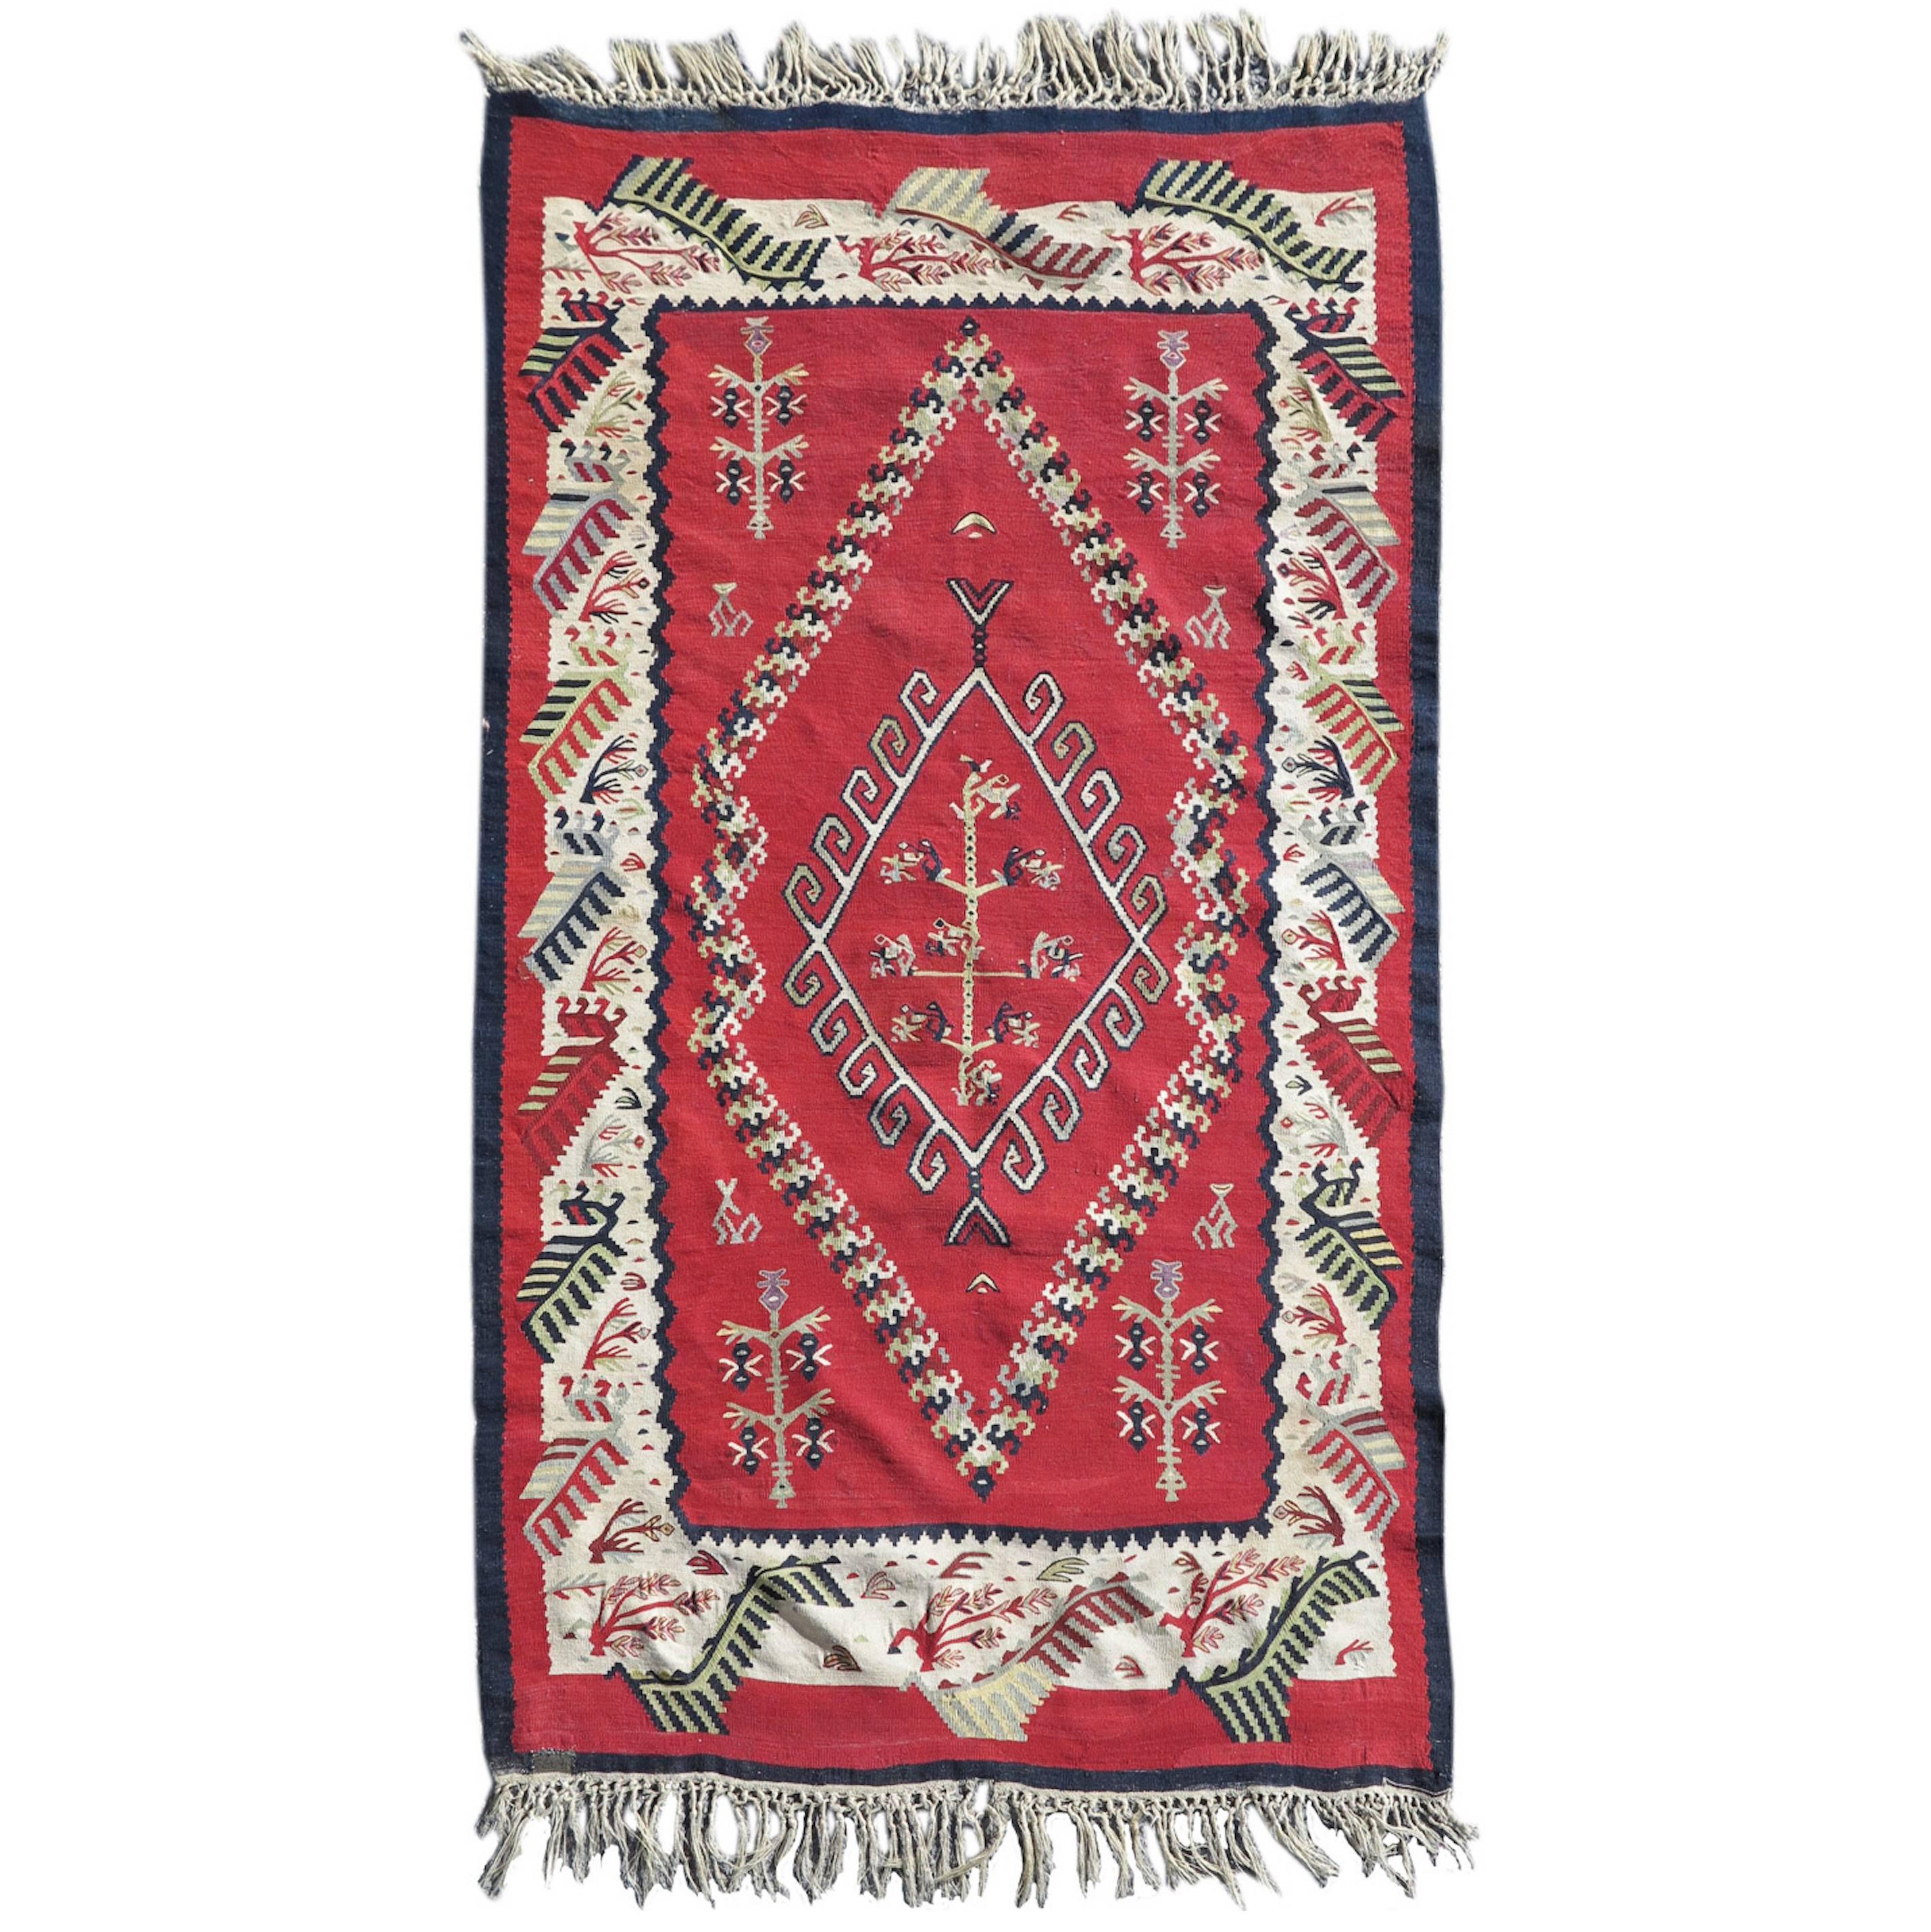 Late 19th Century Leaves and Trees Sharkoy Kilim Rug